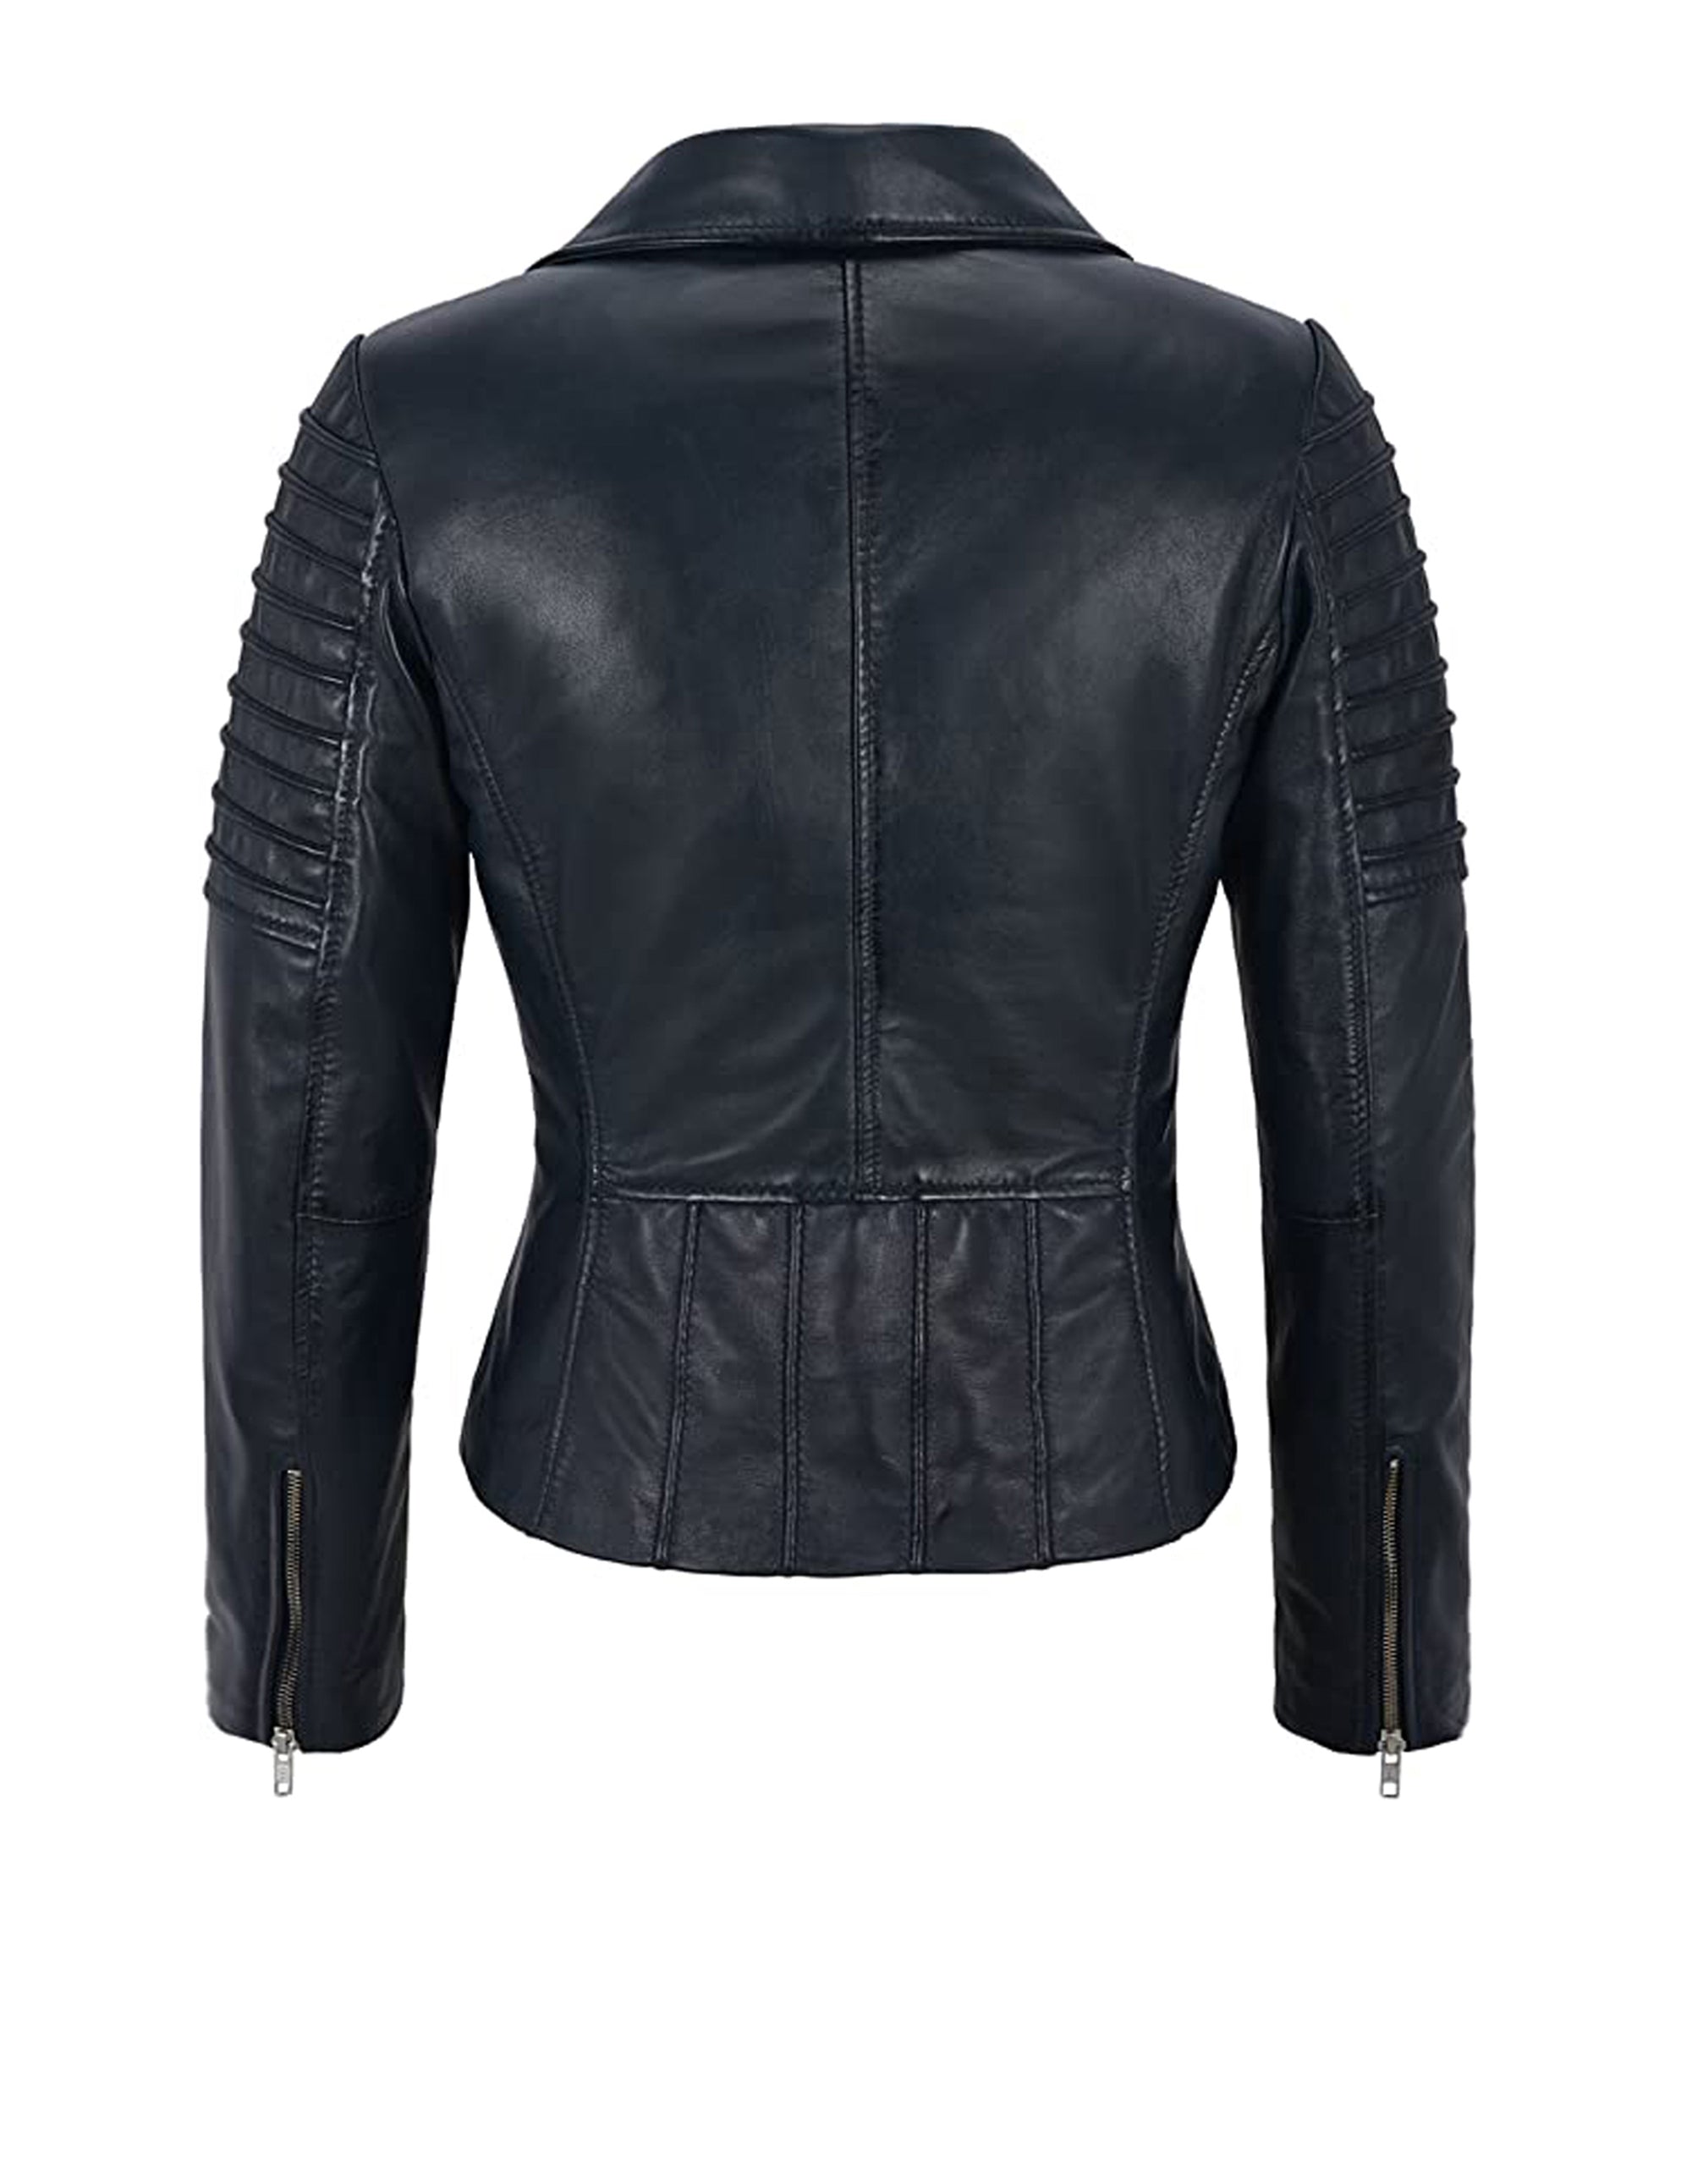 Y.A.S Leather Jackets sale - discounted price | FASHIOLA INDIA